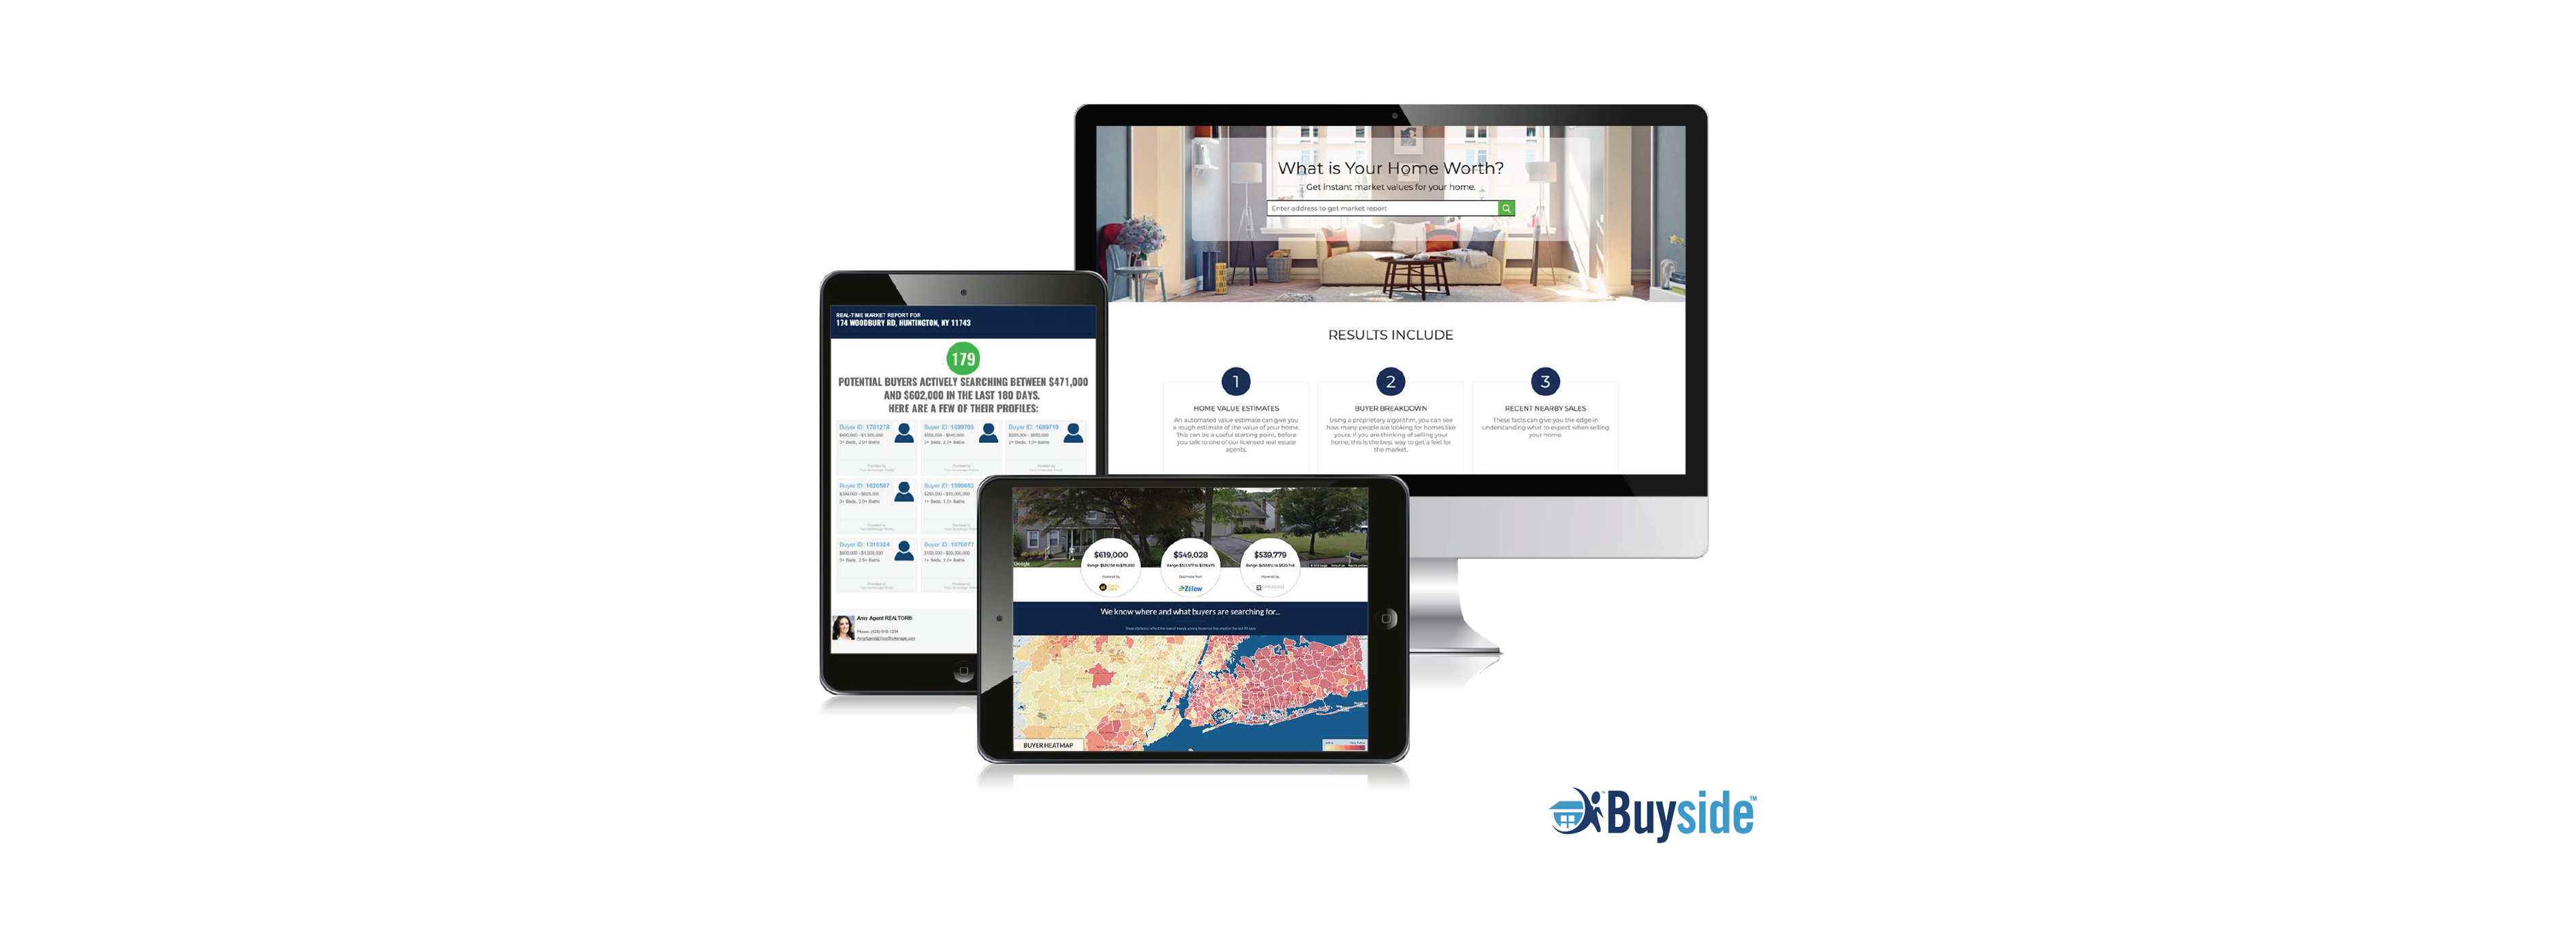 Buyside™ Reports Record Uptick in Partnerships, Engagement, and ROI Despite Pandemic